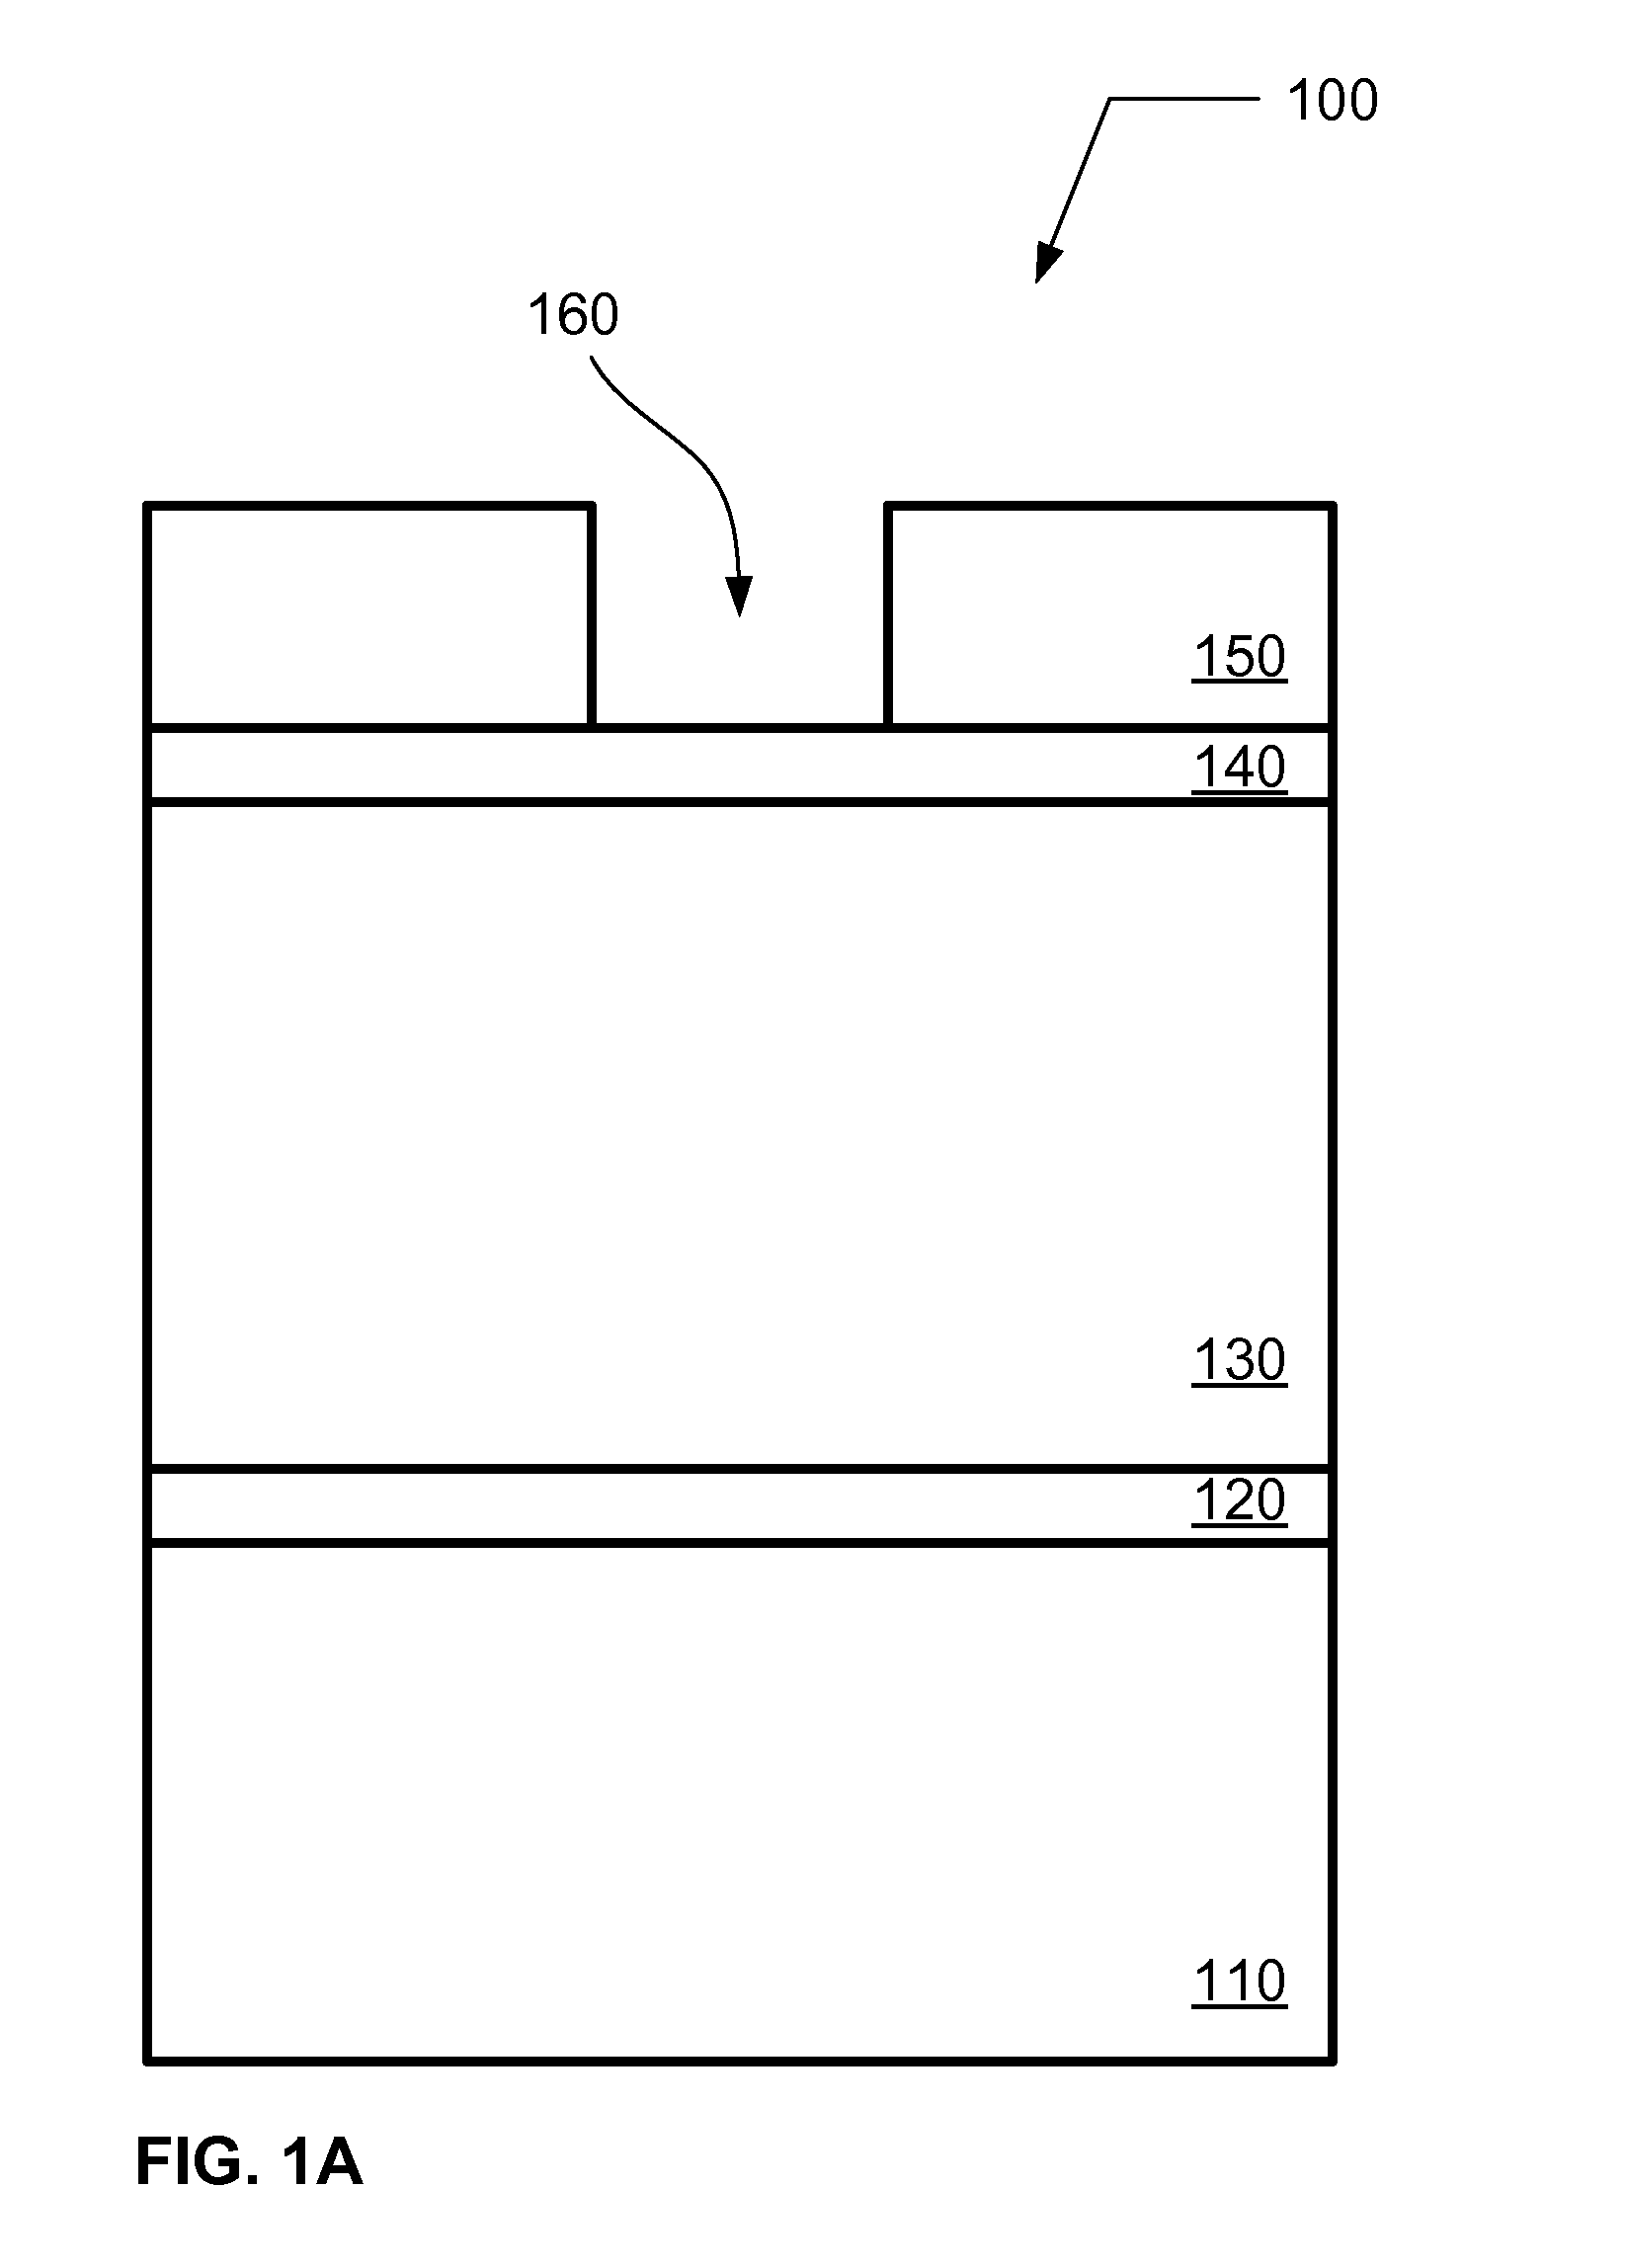 Method of selectively etching an insulation stack for a metal interconnect